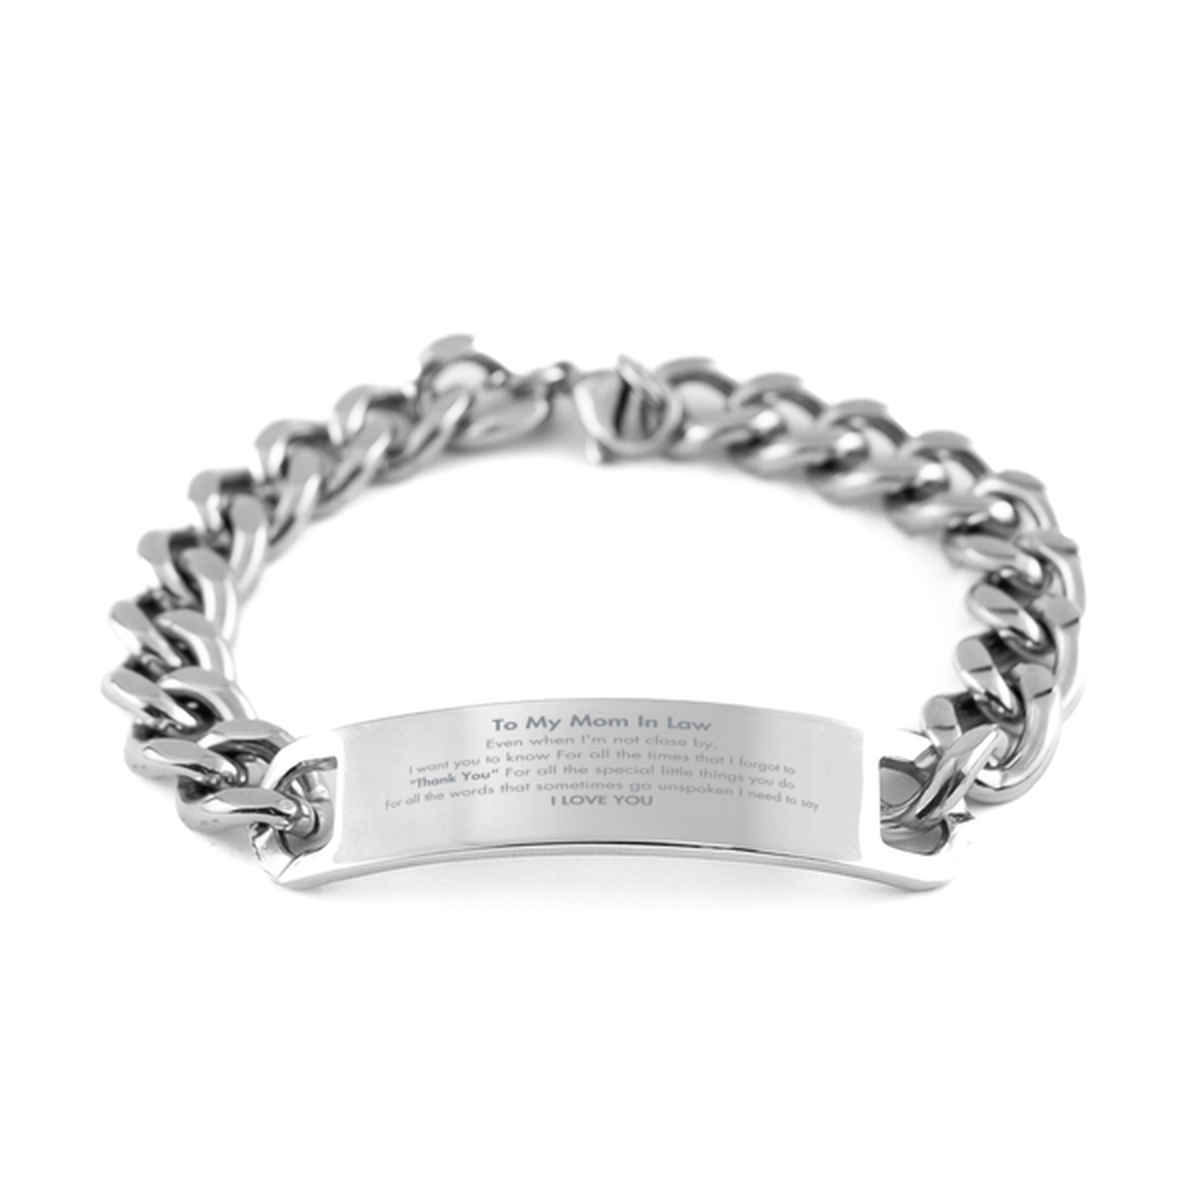 Thank You Gifts for Mom In Law, Keepsake Cuban Chain Stainless Steel Bracelet Gifts for Mom In Law Birthday Mother's day Father's Day Mom In Law For all the words That sometimes go unspoken I need to say I LOVE YOU